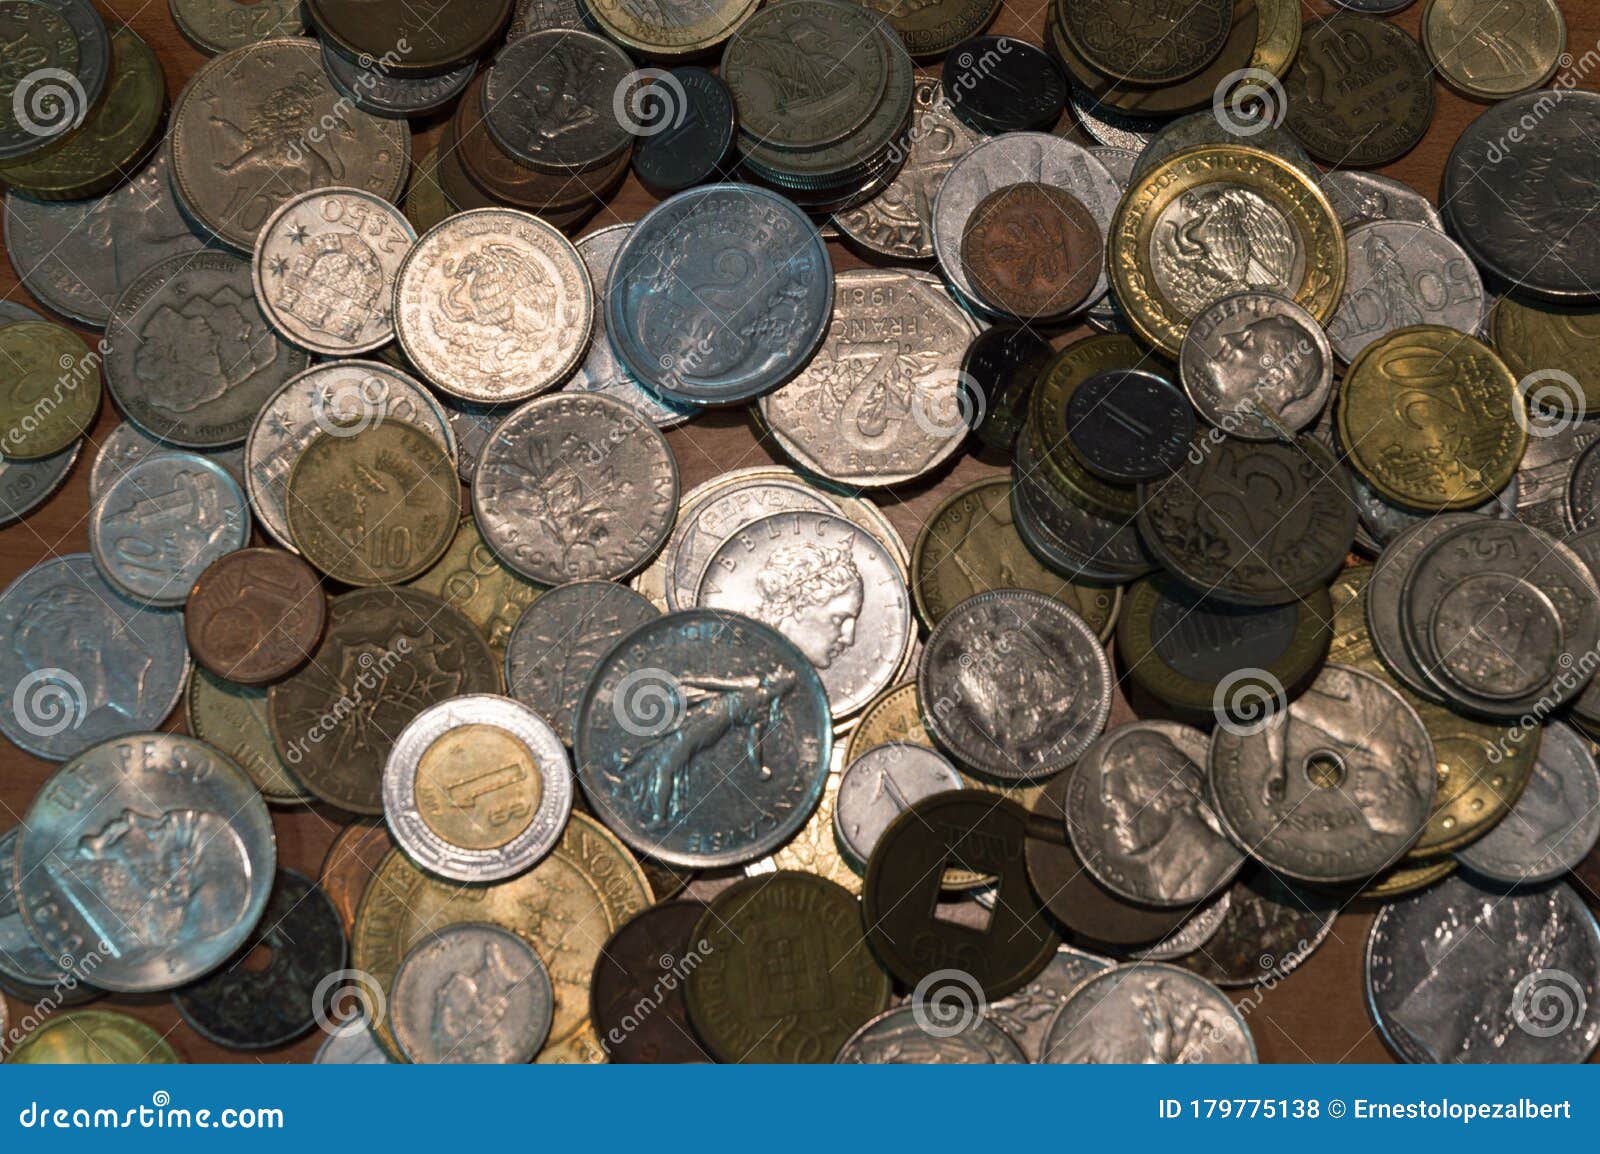 collection of coins from various countries